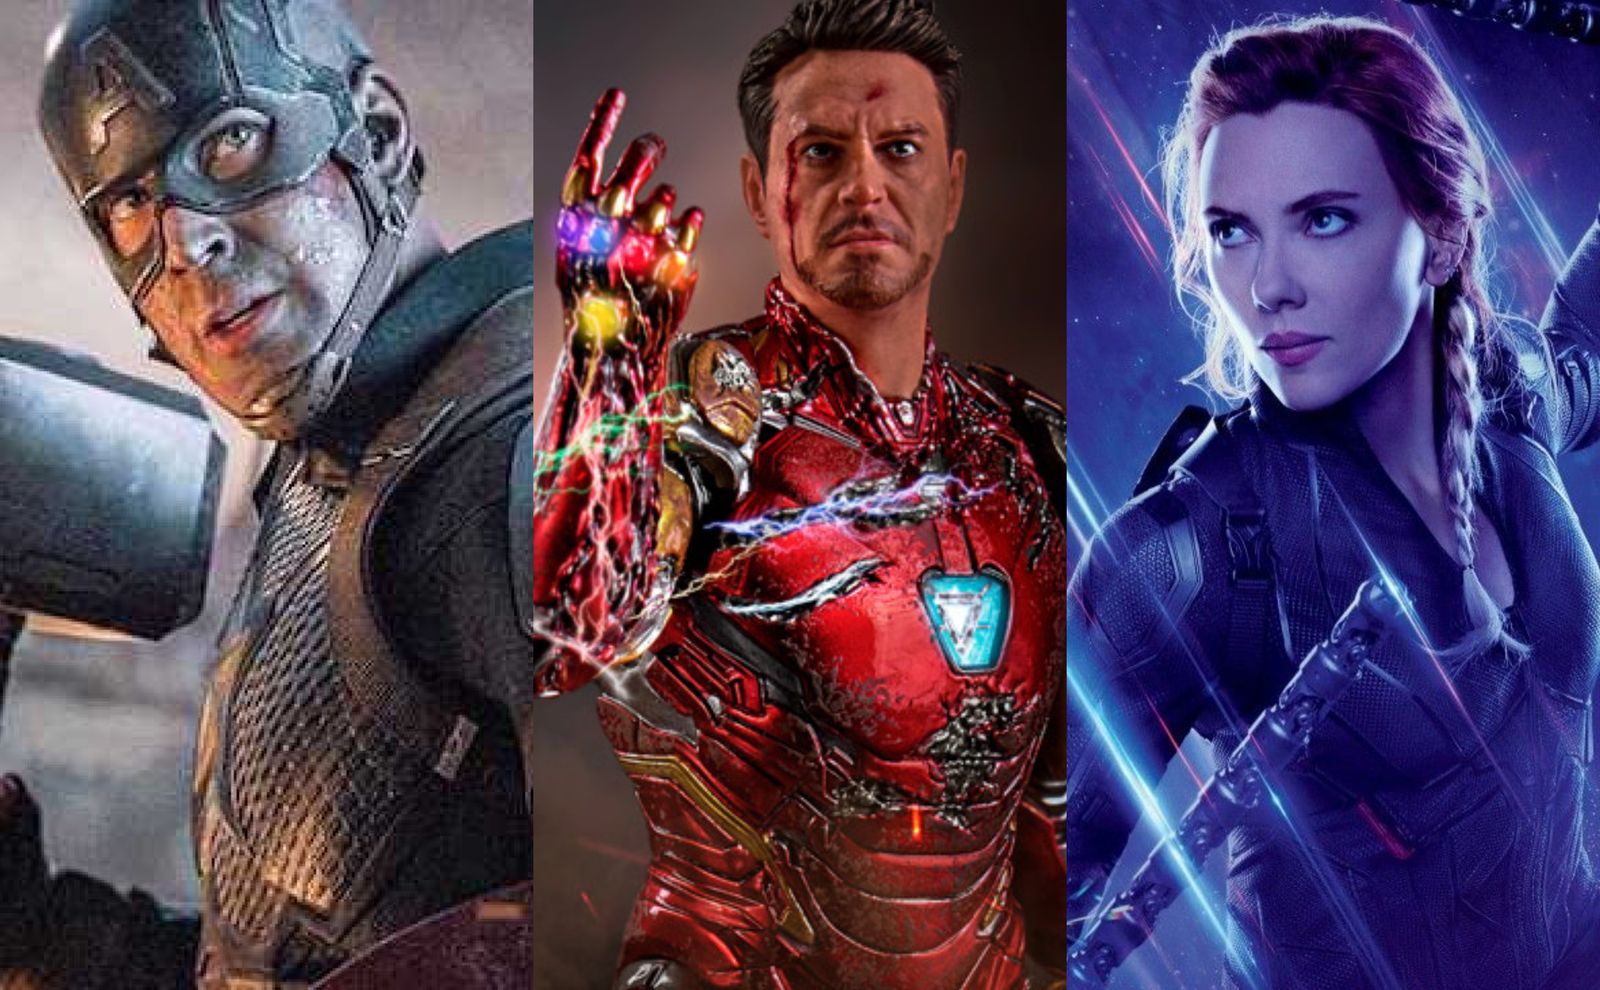 One Year Of Avengers: Endgame- Fans Celebrate By Sharing Their Favorite Scenes; Remember Iron Man, Black Widow